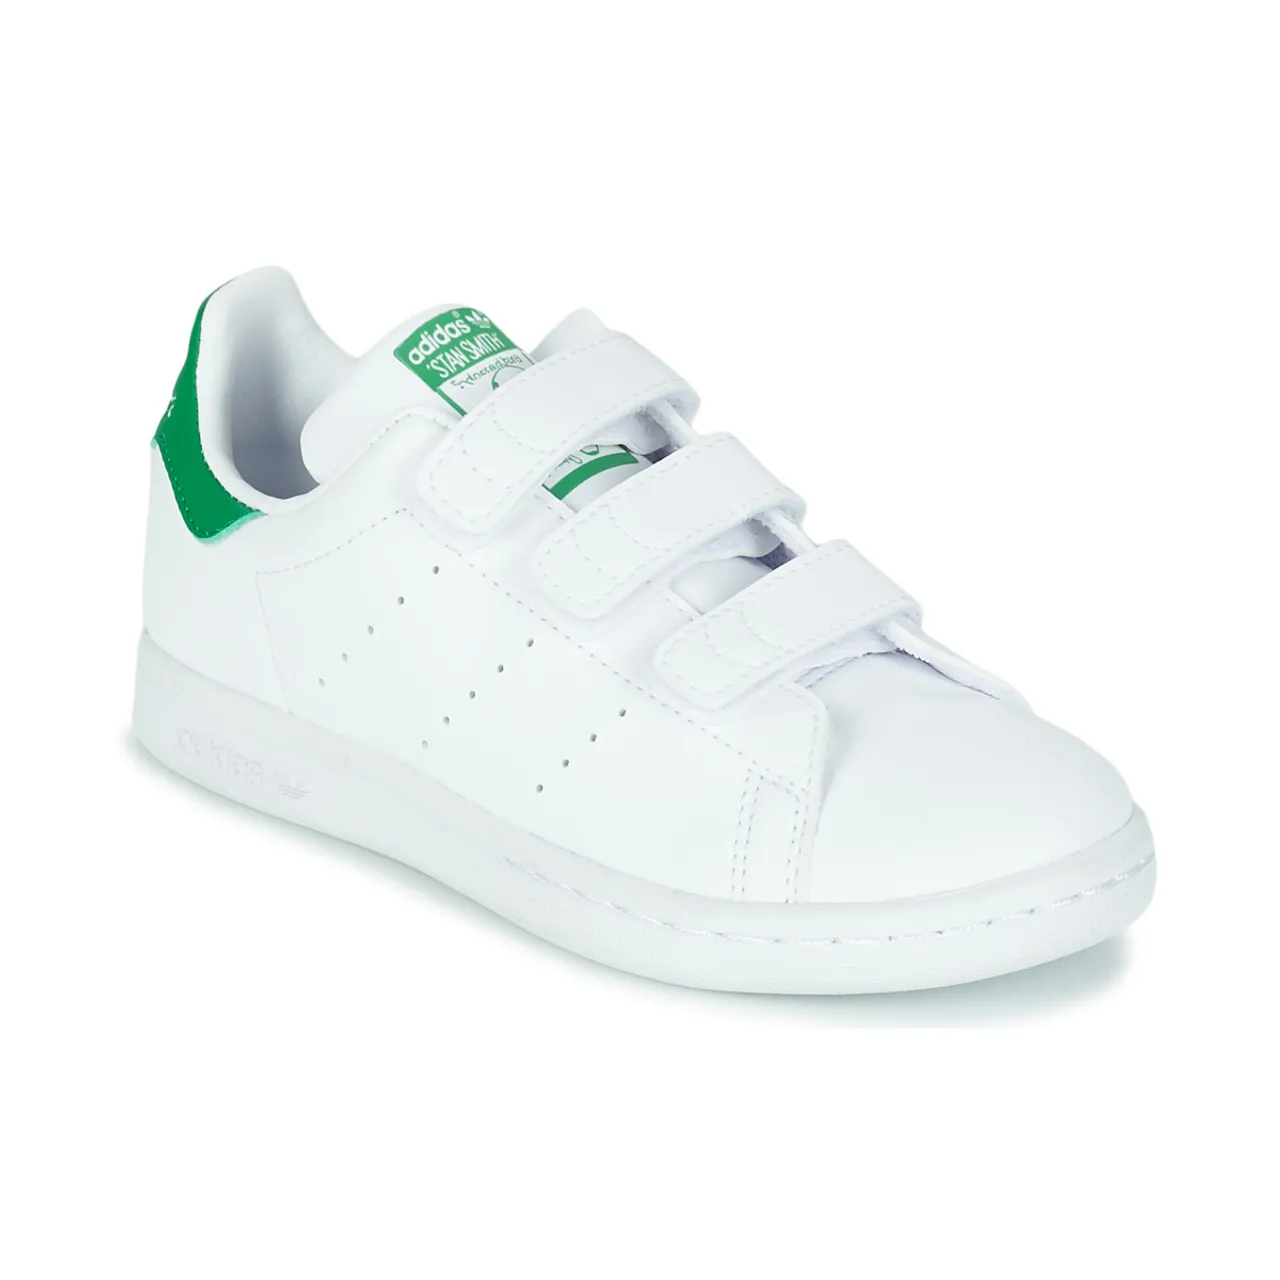 adidas  STAN SMITH CF C SUSTAINABLE  boys's Children's Shoes (Trainers) in White